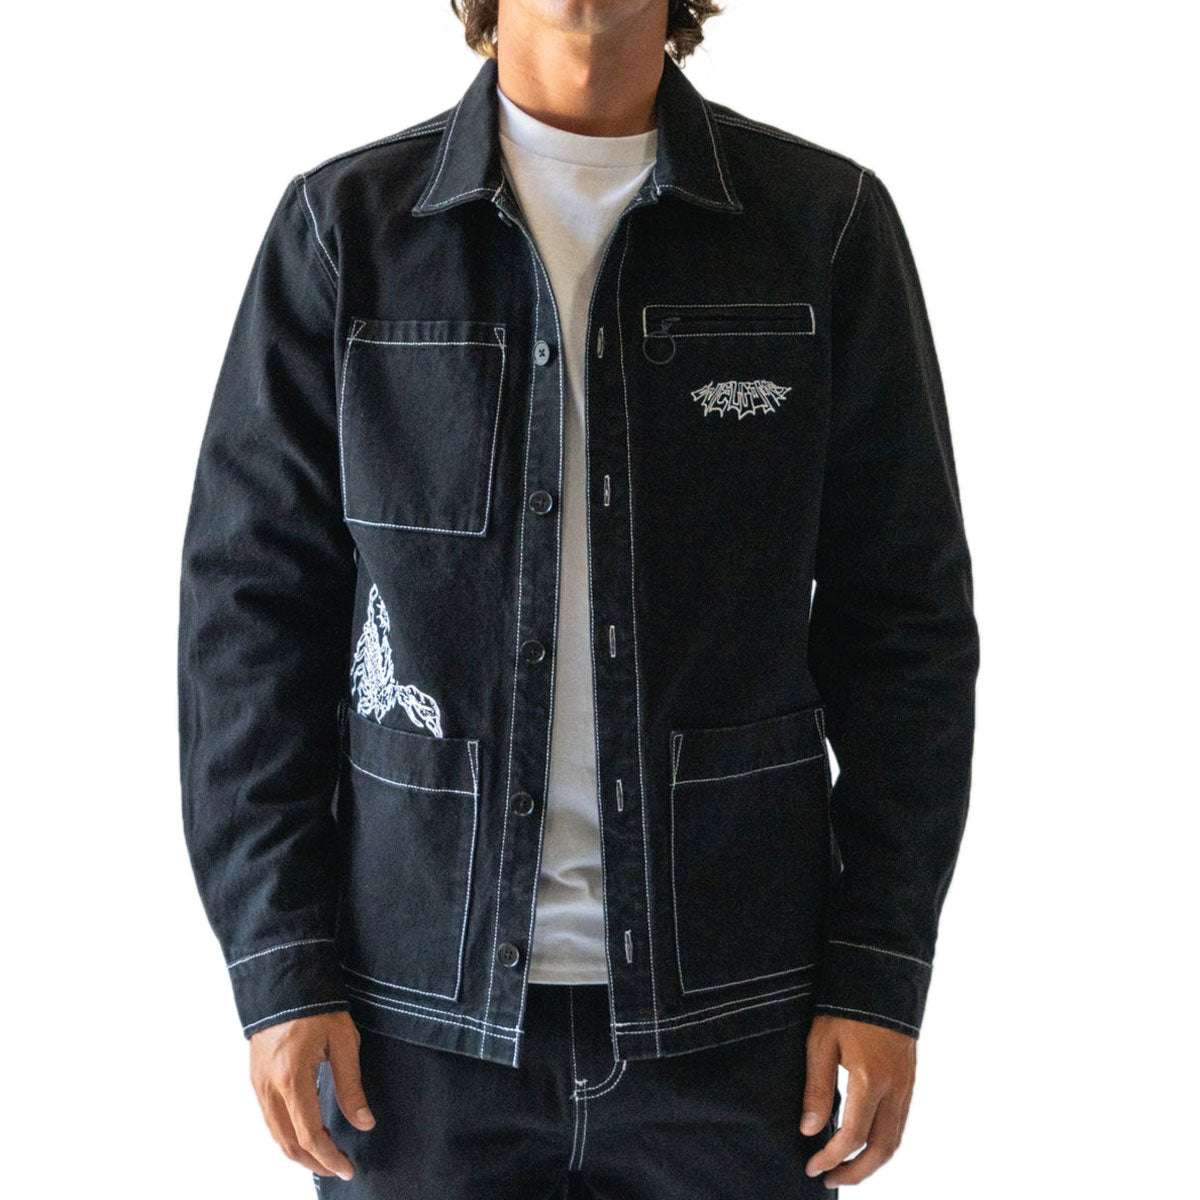 Welcome Stowaway Canvas Chore Jacket - Black image 2